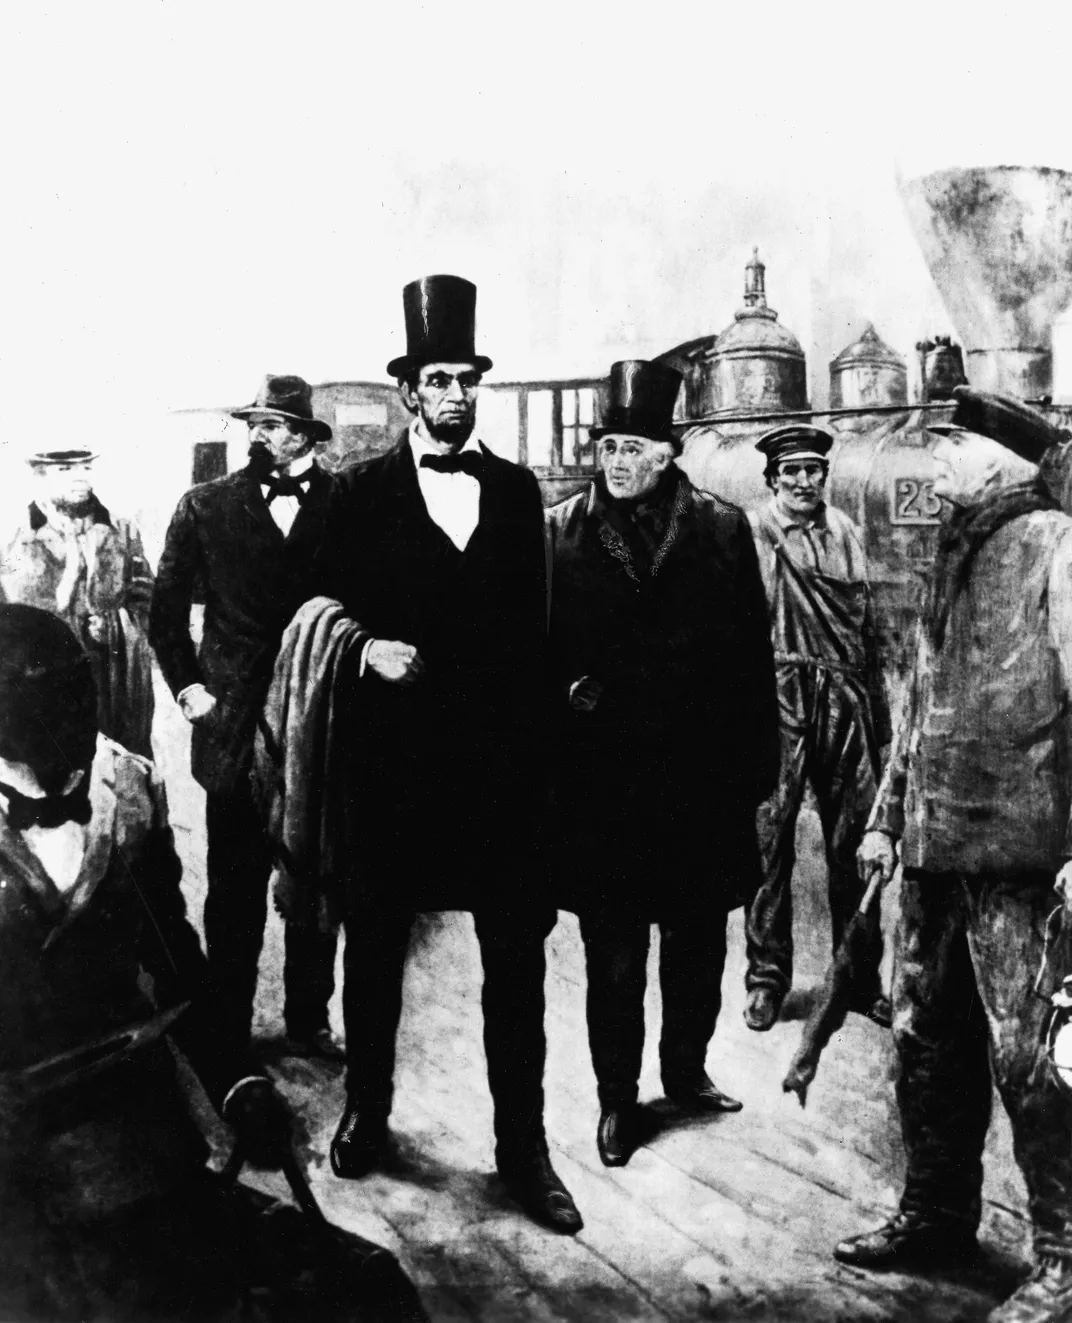 Depiction of Abraham Lincoln, detective Allan Pinkerton and bodyguard Ward Hill Lamon arriving in Washington, D.C. on February 23, 1861.